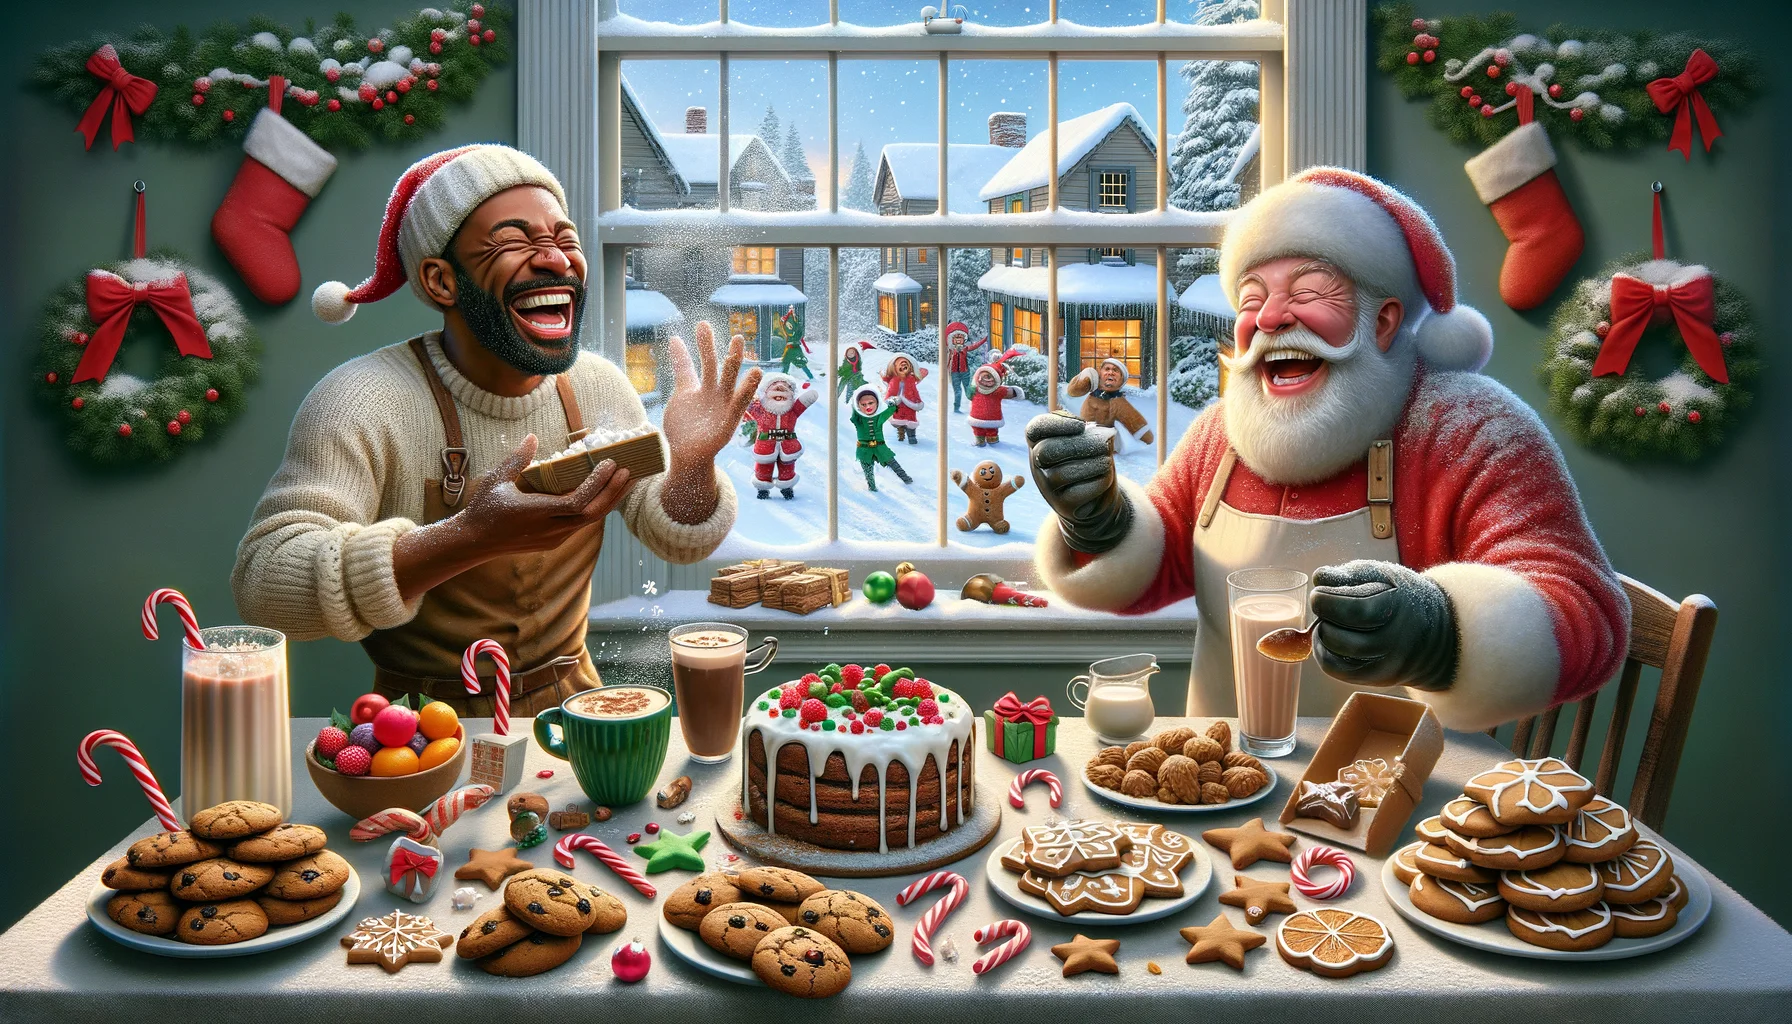 Imagine an amusing and lifelike scenario centered around 'Holiday Treats'. Picture a snowy view from a window that provides the perfect backdrop. A table full of delectable holiday treats like gingerbread cookies, fruit cake, eggnog, candy canes, and hot chocolate with marshmallows meticulously arranged for a perfect aesthetic appeal. A jovial Caucasian Santa Claus and a Black elf are laughing heartily while packing gifts for children. The elf accidentally sprinkles extra snowflakes shaped sugar on the cookies, while Santa, wearing oven mitts, brings out a batch of fresh cookies from the oven. The picture is filled with humorous yet heartwarming holiday spirit.